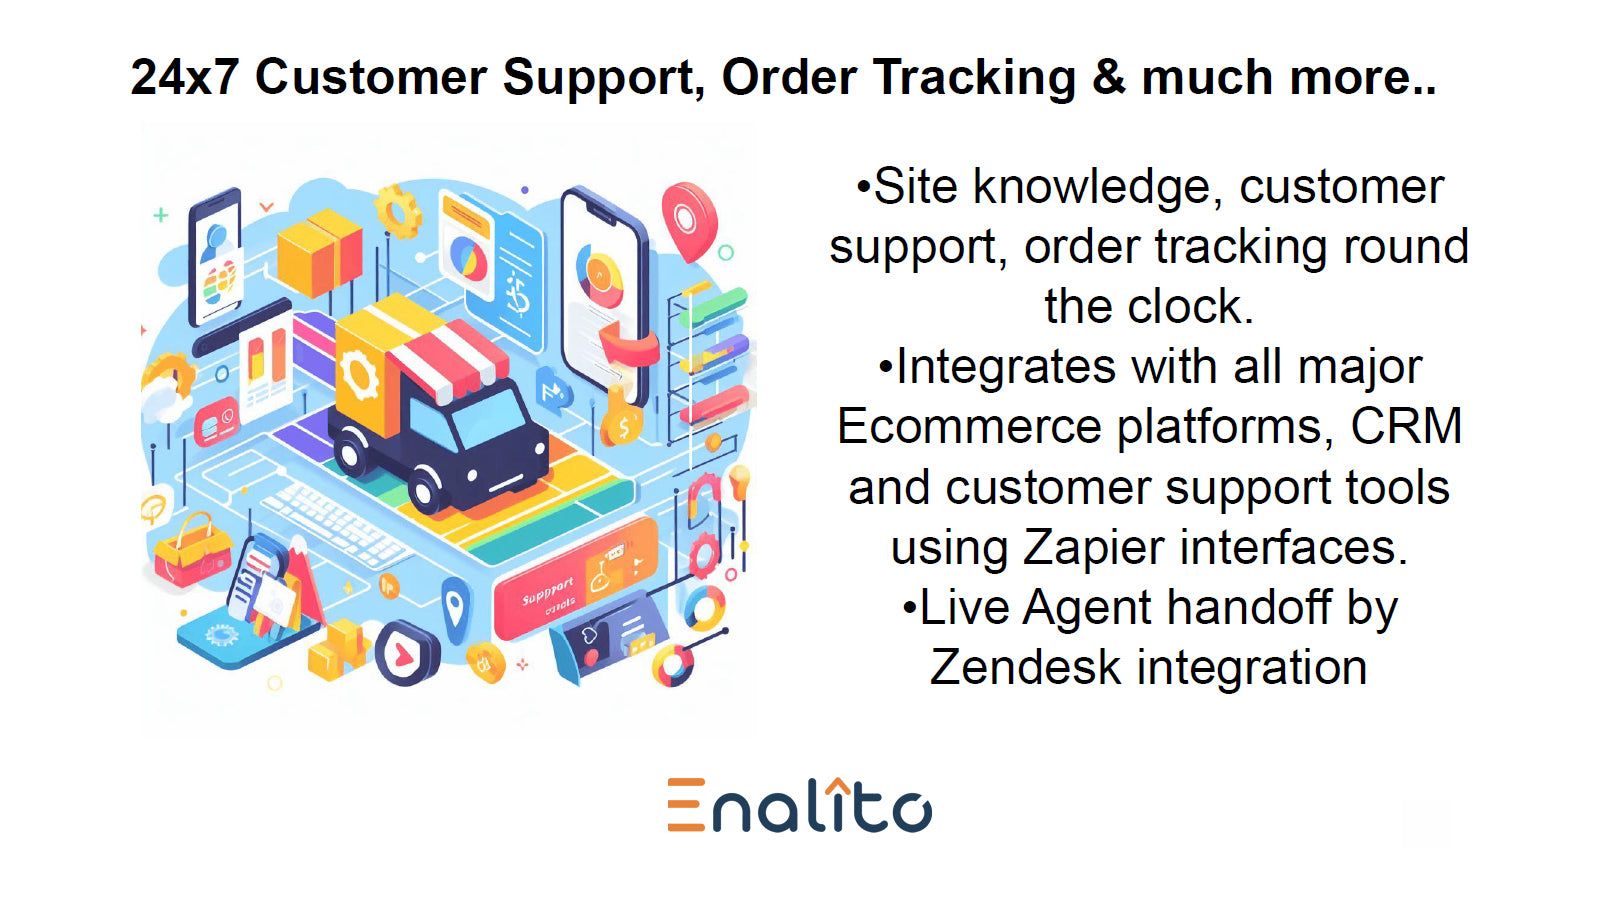 Customer Support, Order Tracking & Much More